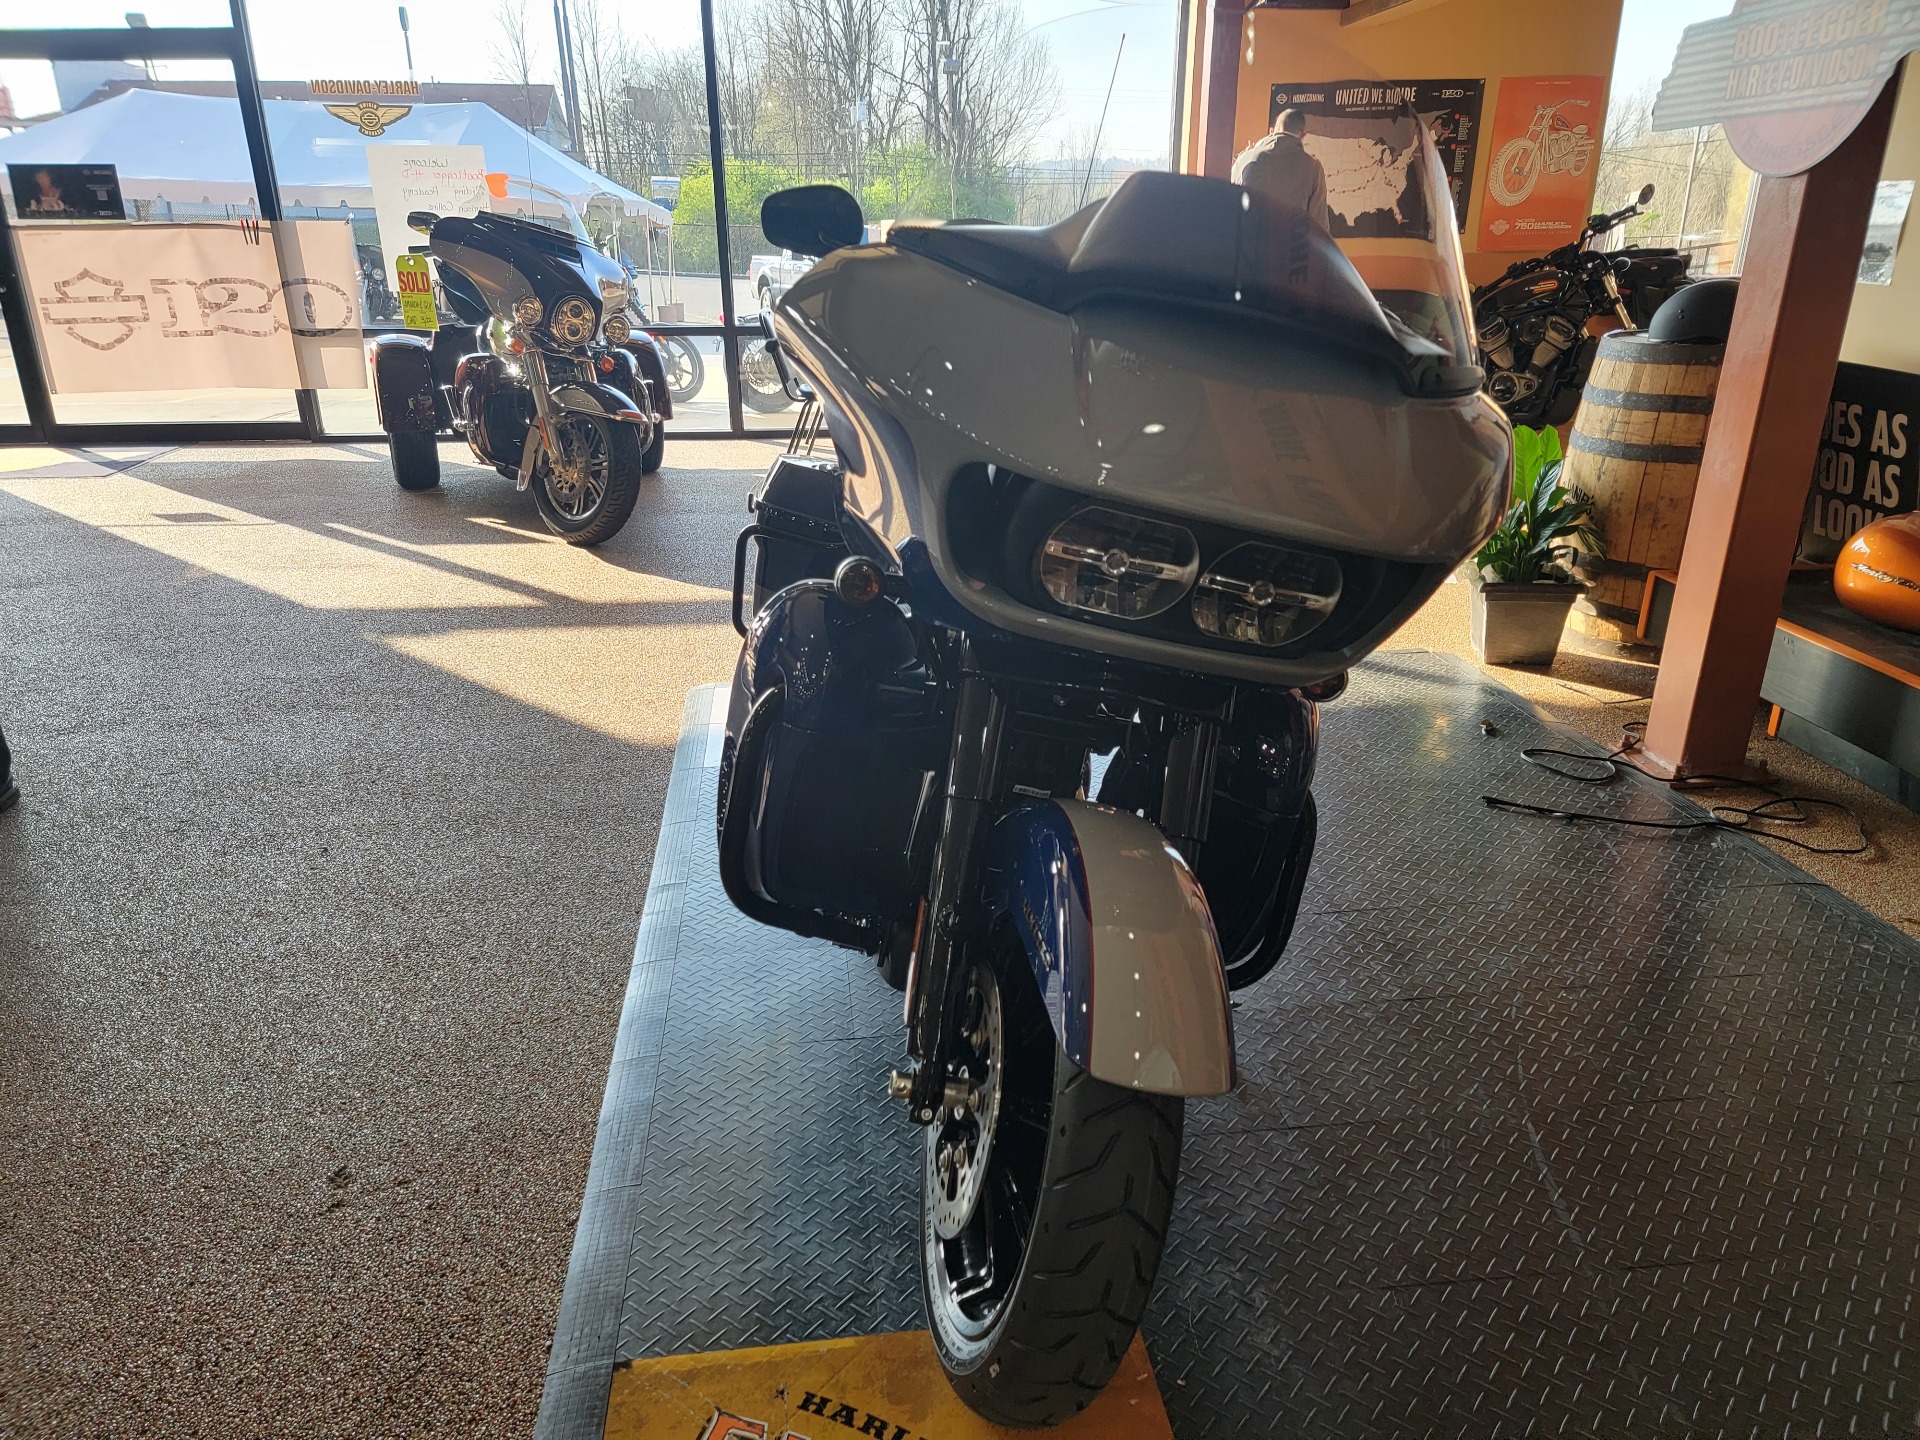 2023 Harley-Davidson Road Glide® Limited in Knoxville, Tennessee - Photo 2